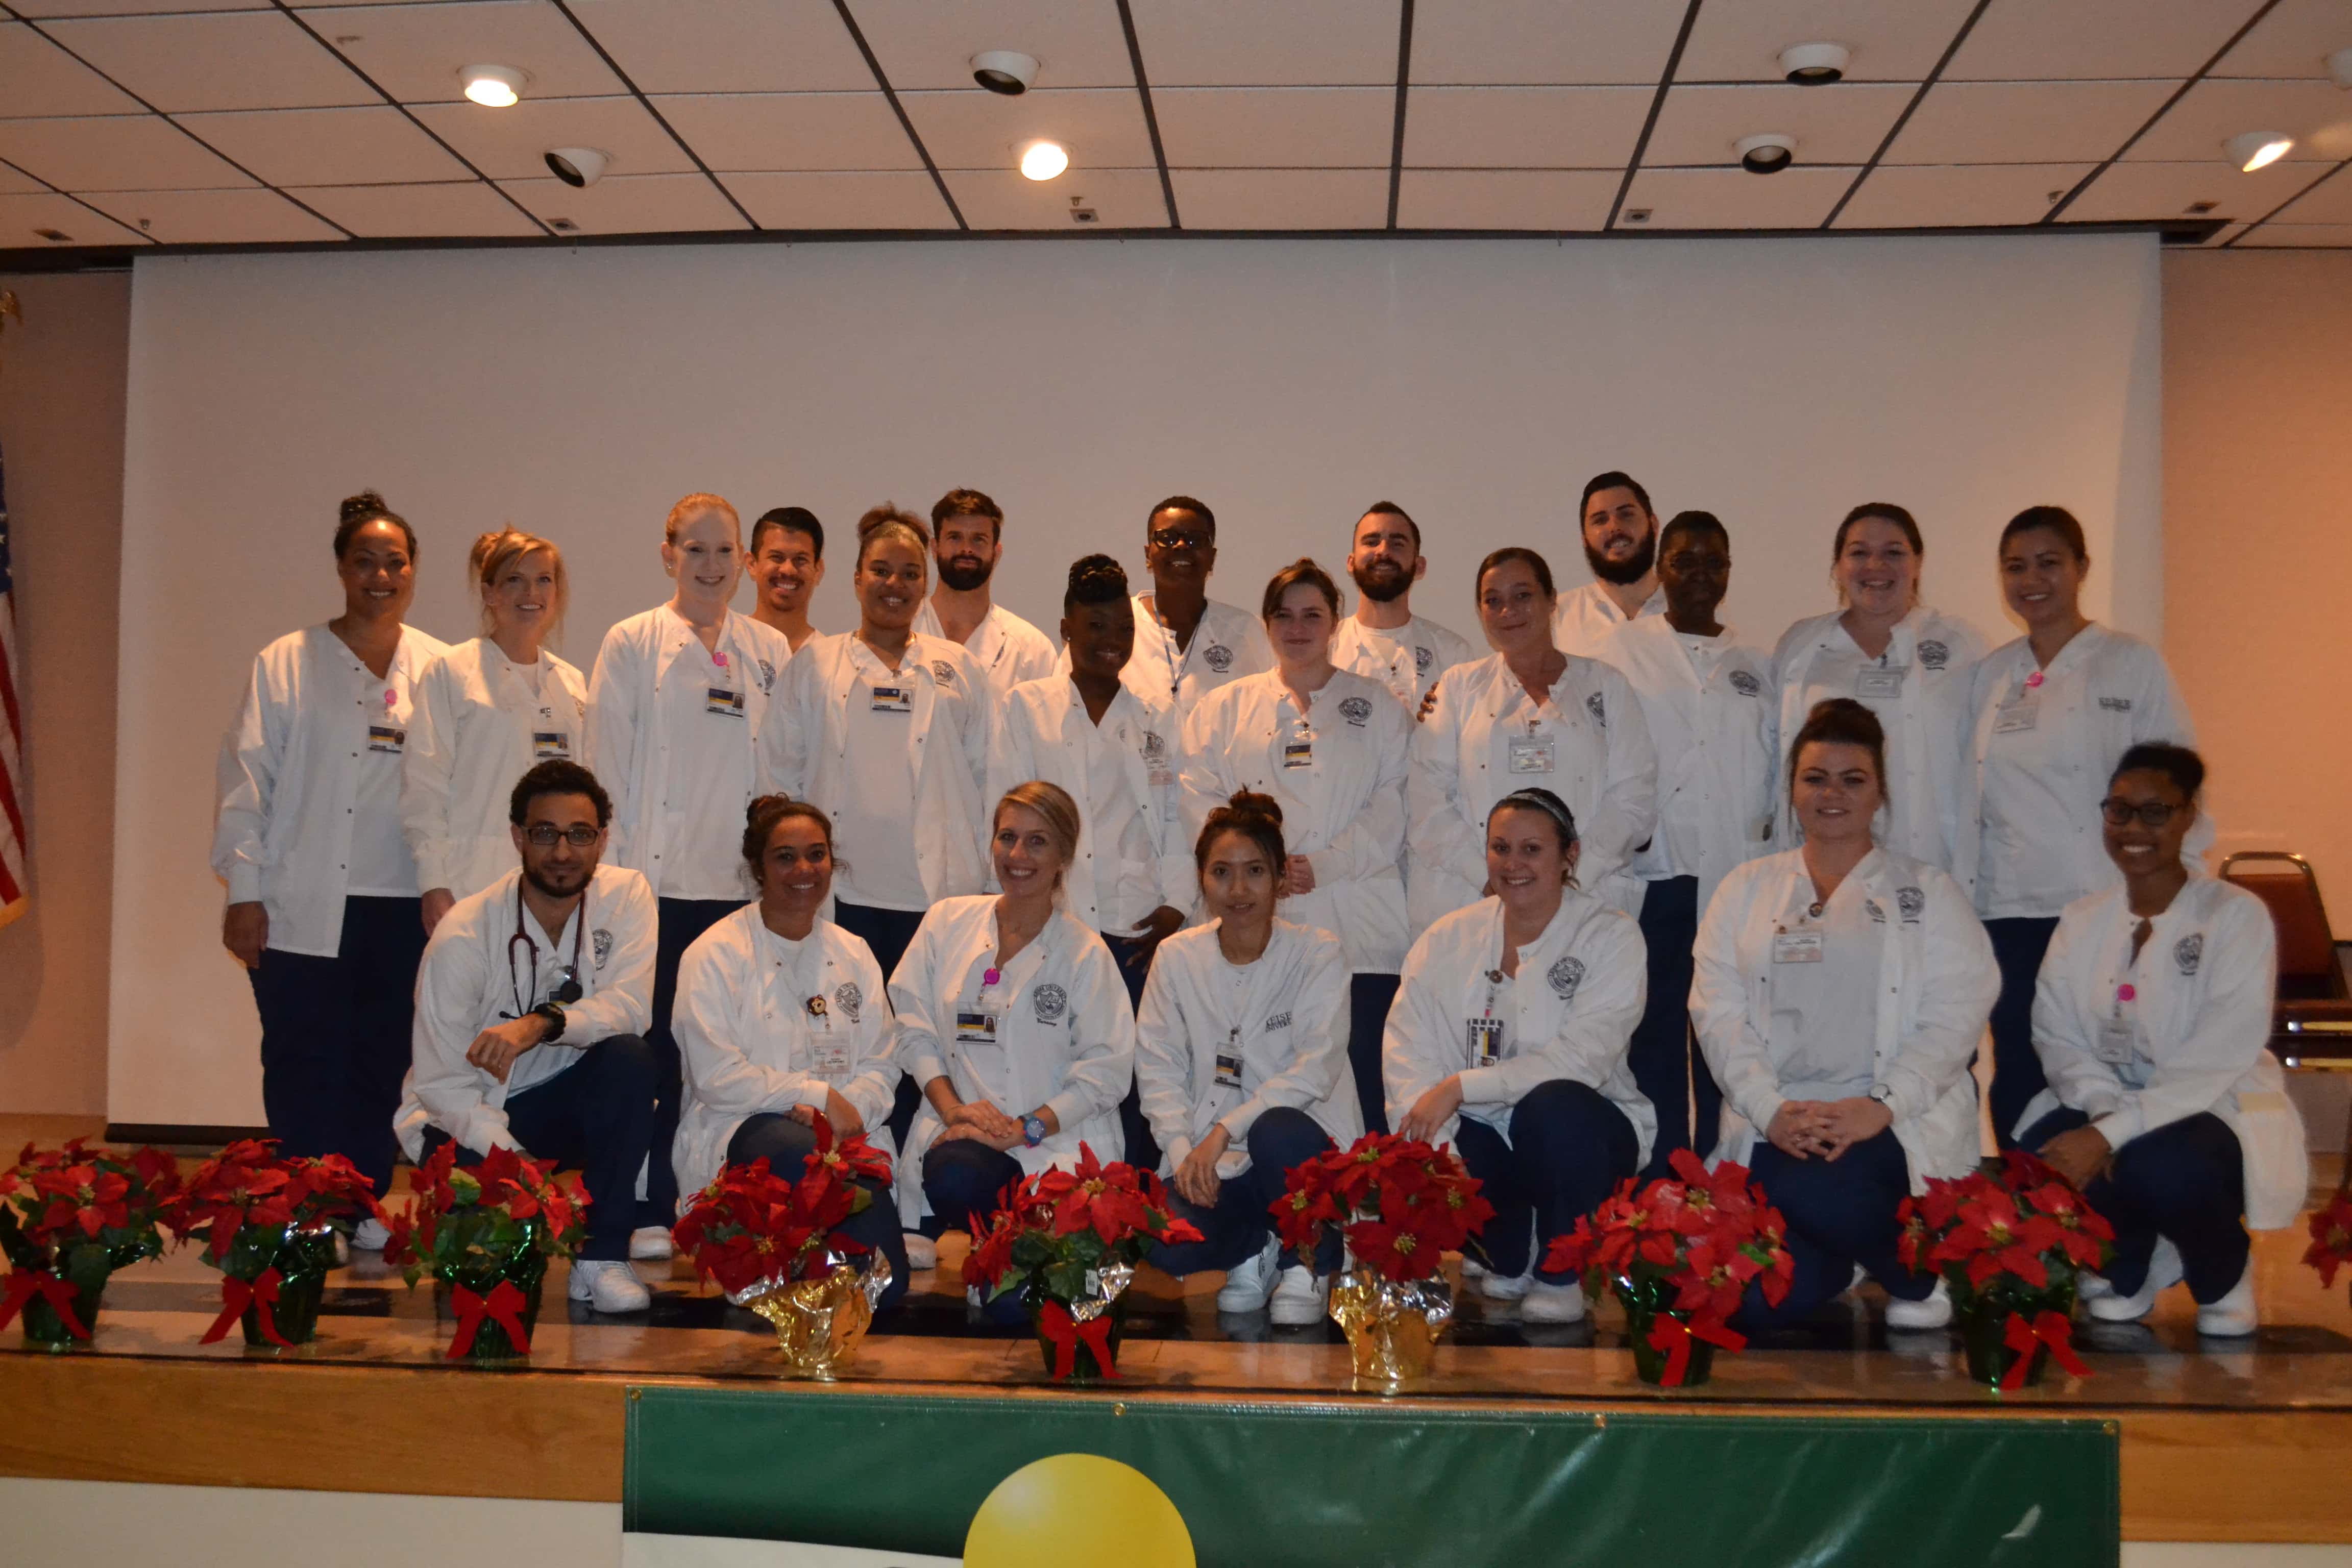 Jacksonville Holds a Pinning Ceremony for Nursing Students